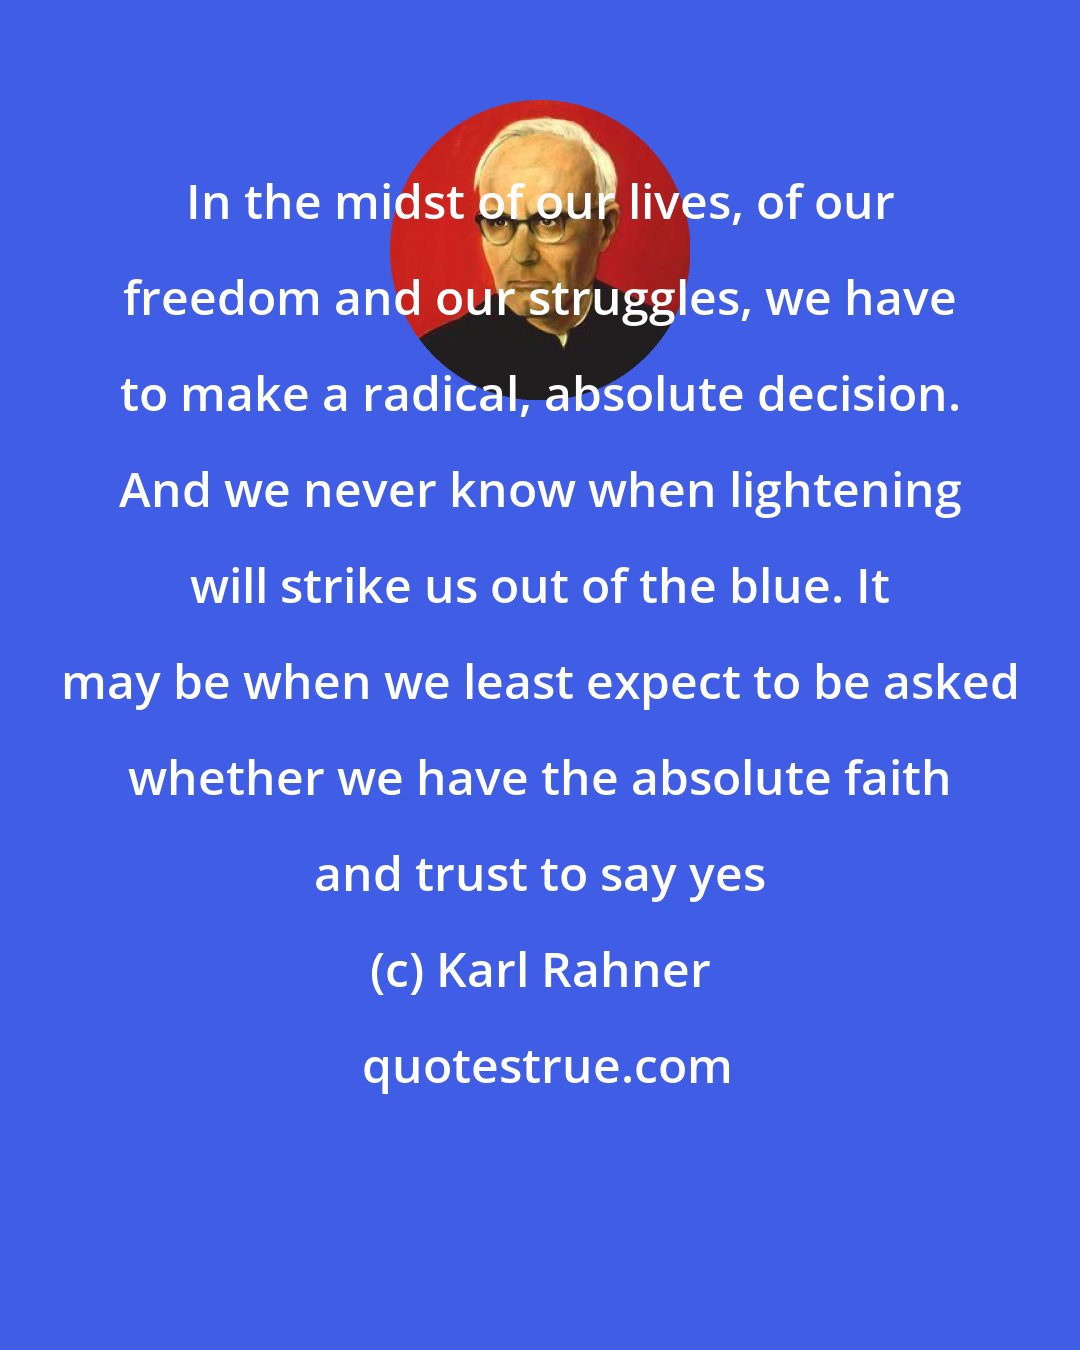 Karl Rahner: In the midst of our lives, of our freedom and our struggles, we have to make a radical, absolute decision. And we never know when lightening will strike us out of the blue. It may be when we least expect to be asked whether we have the absolute faith and trust to say yes